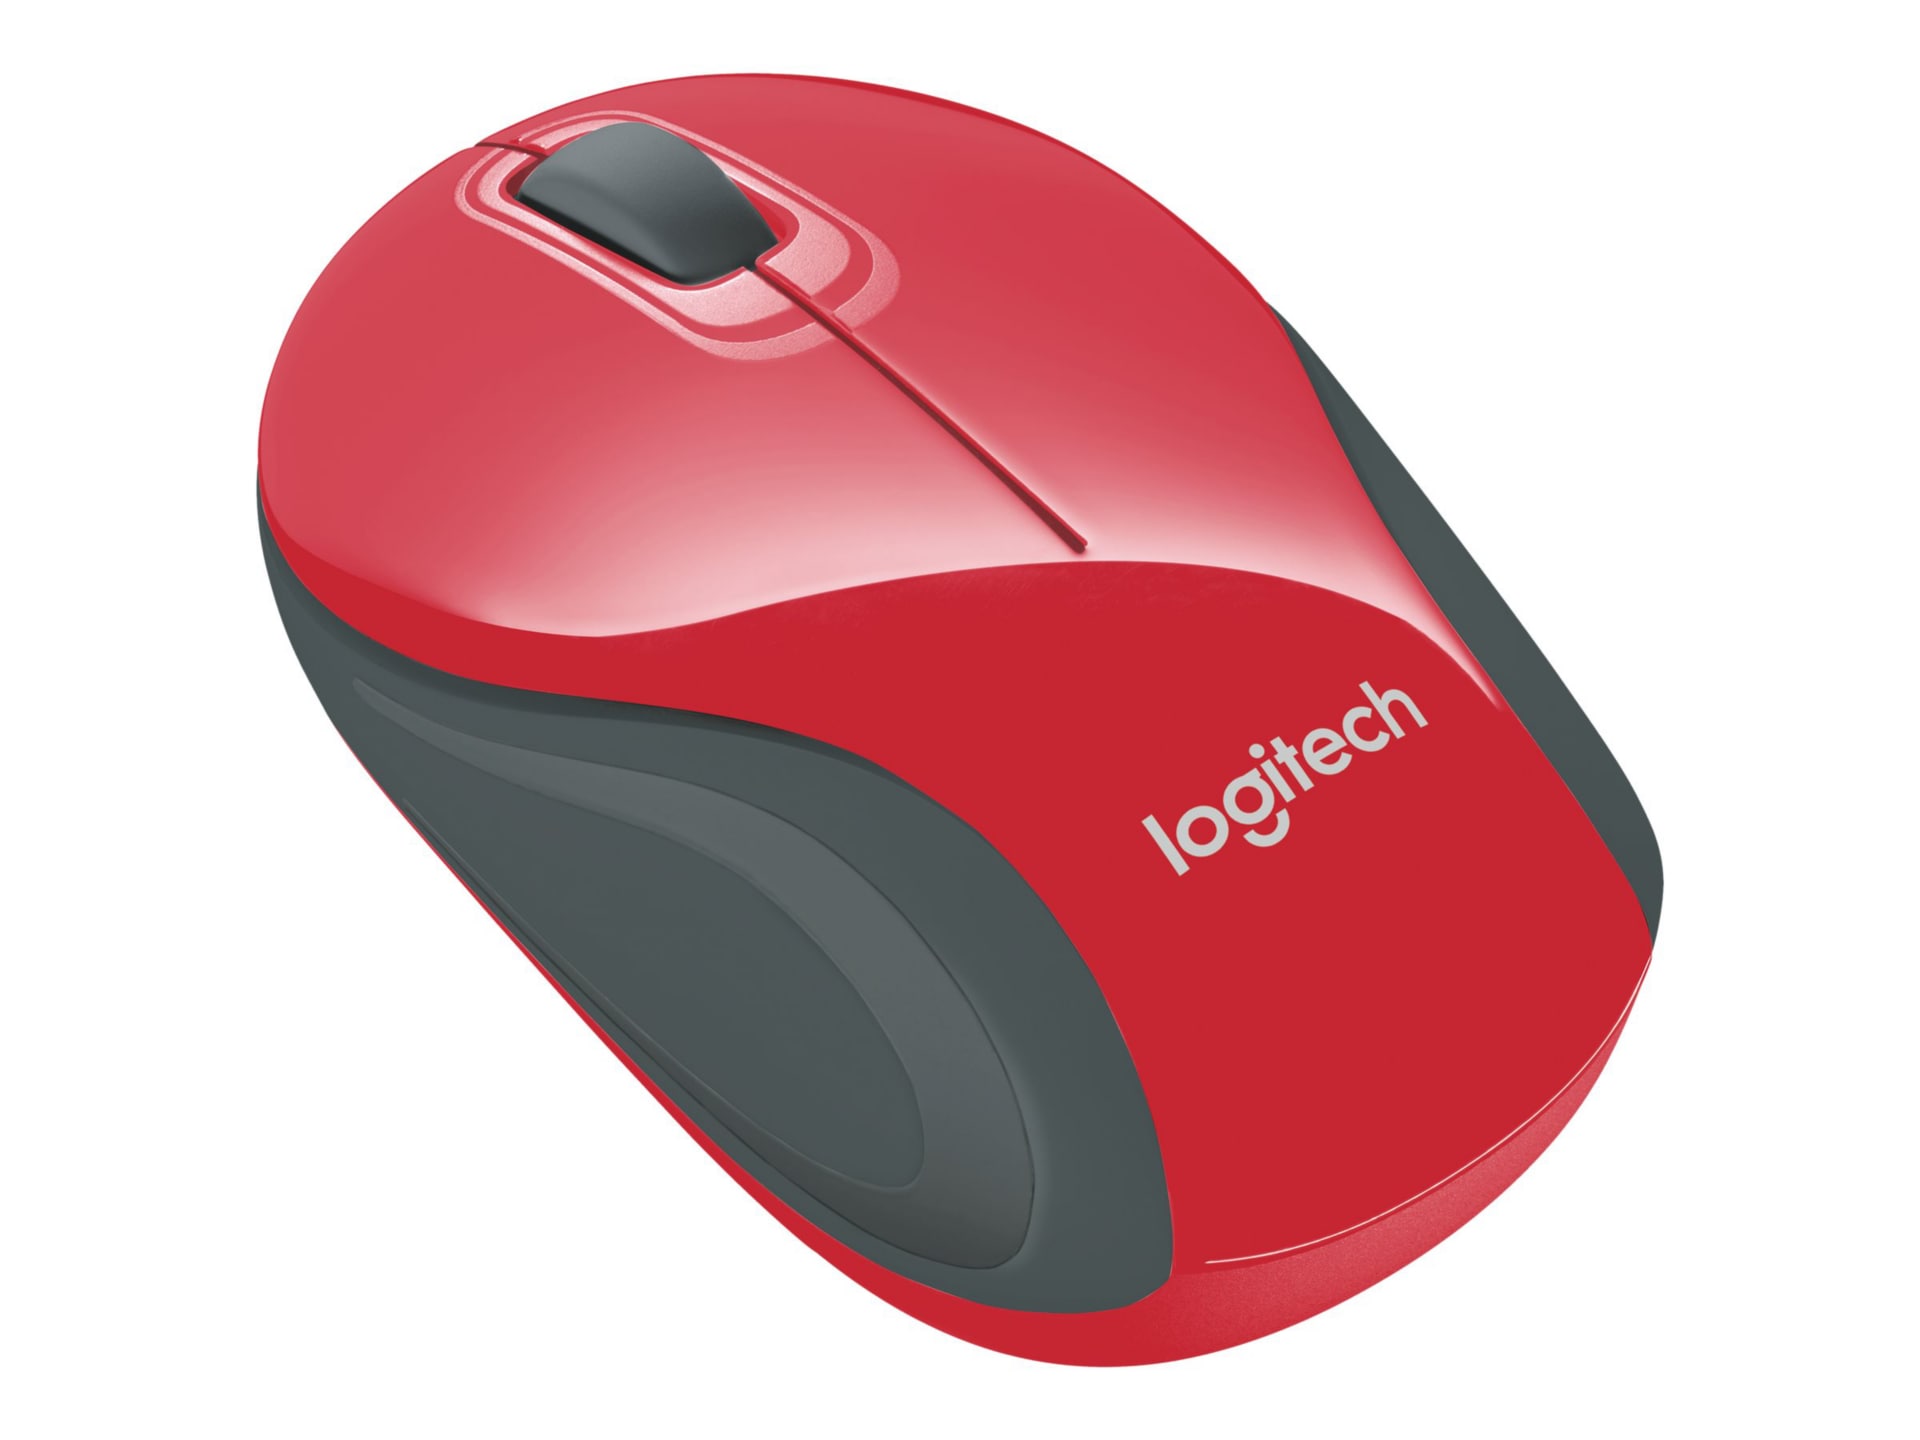 910-002727 GHz - - M187 2.4 Mice - - mouse Logitech red -